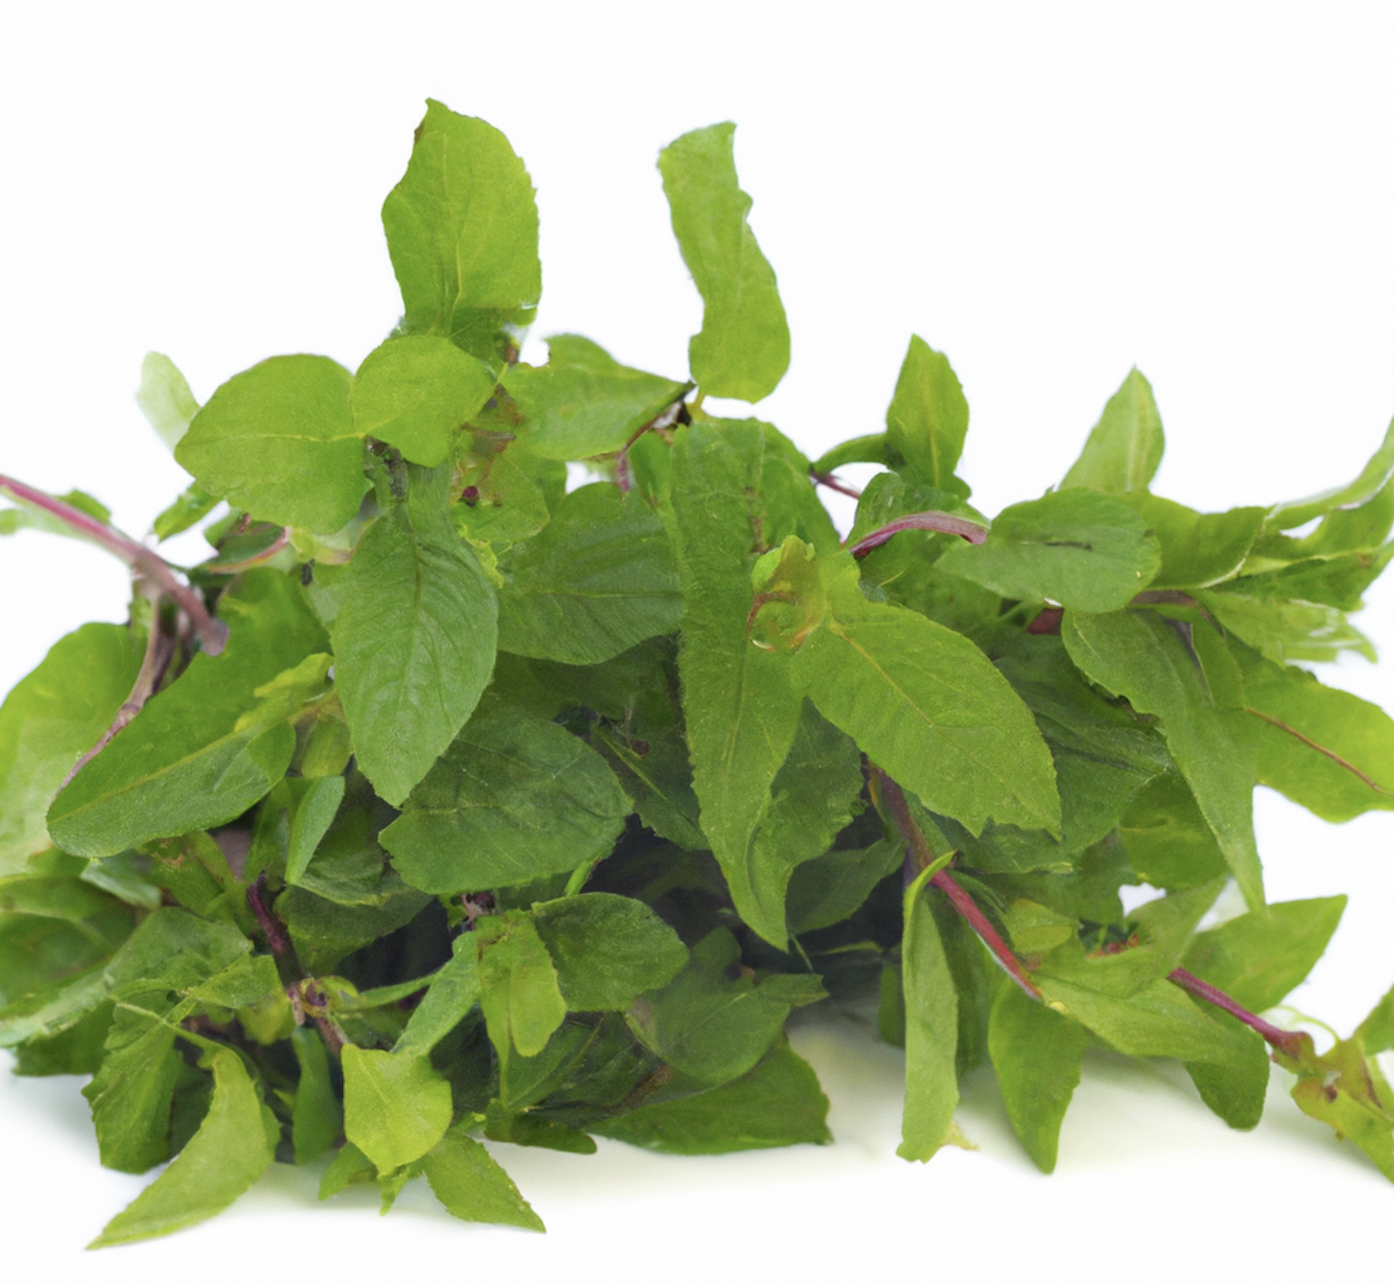 Mint leaves - Health Benefits, Uses and Important Facts - PotsandPans India